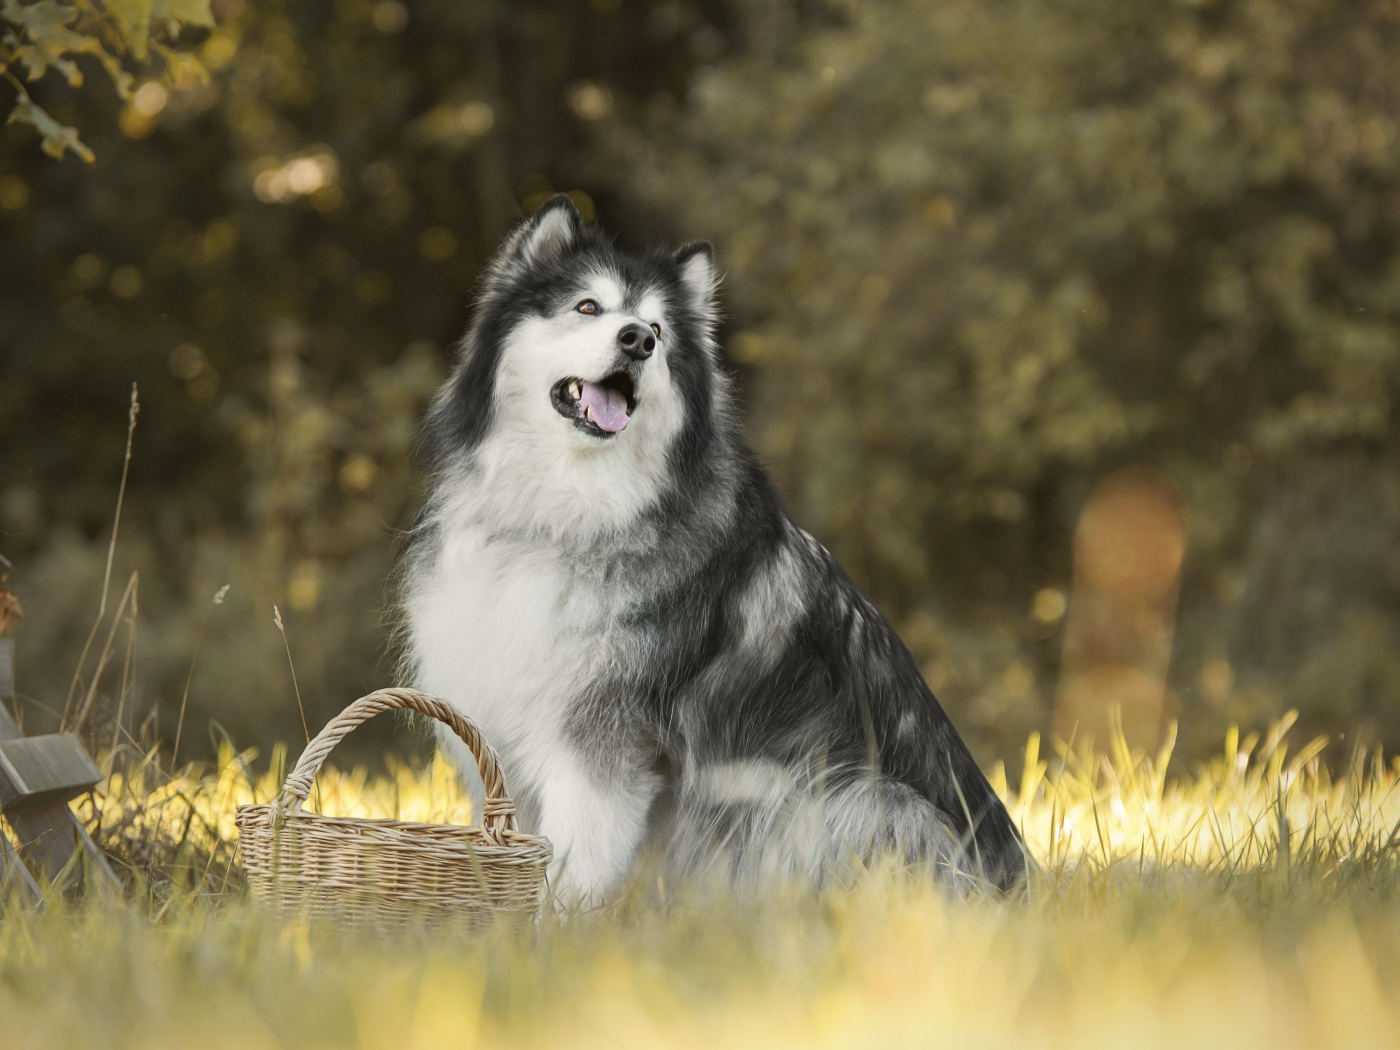 Big dog sits on the grass with a basket